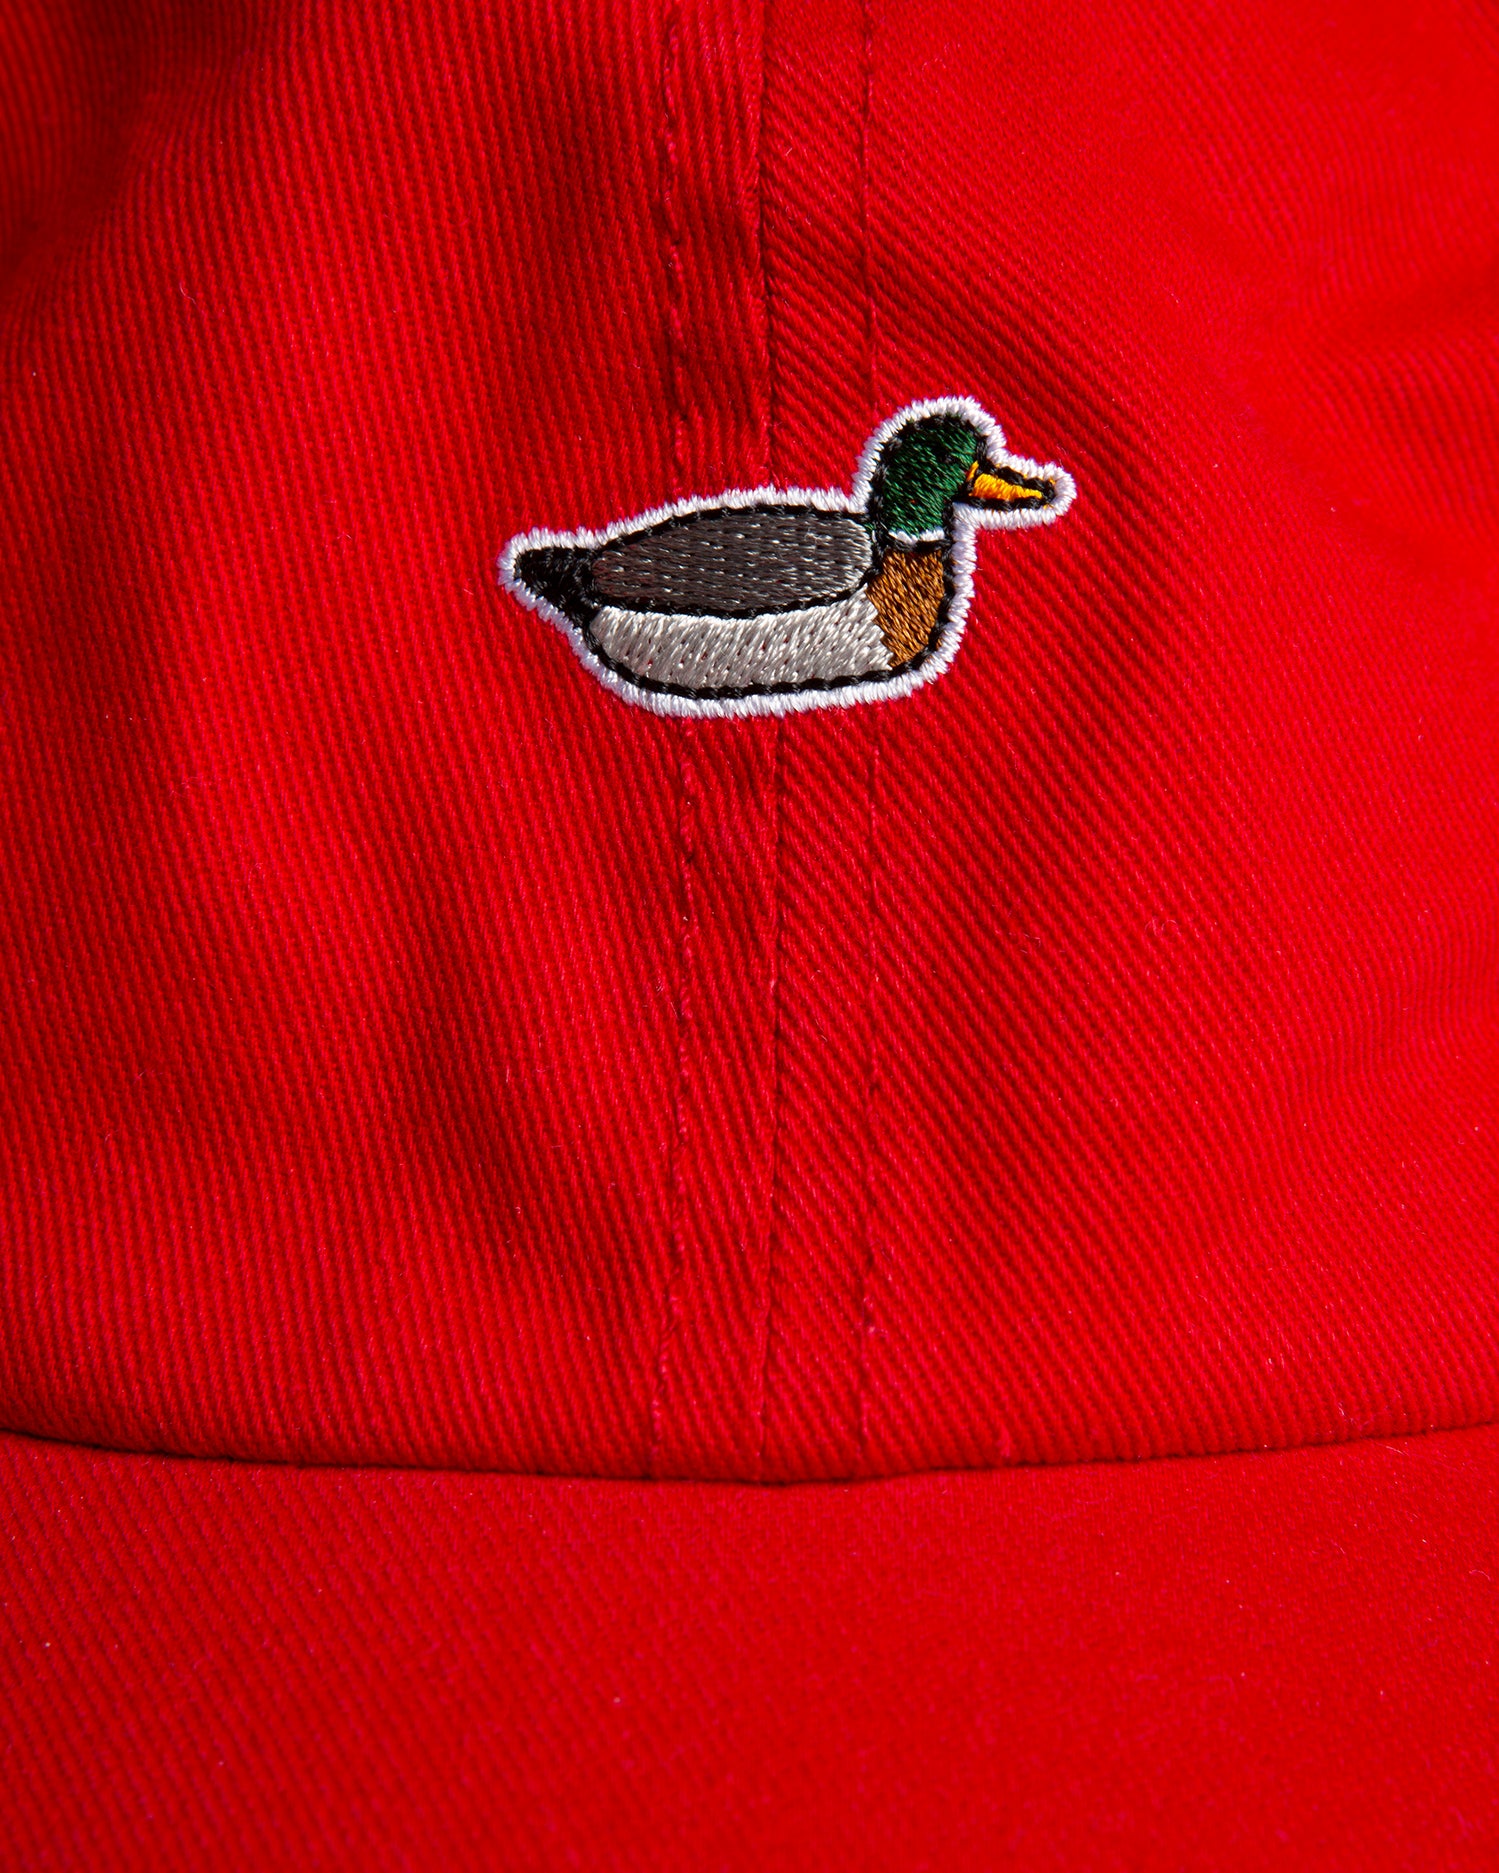 Duck Patch Cap - Red